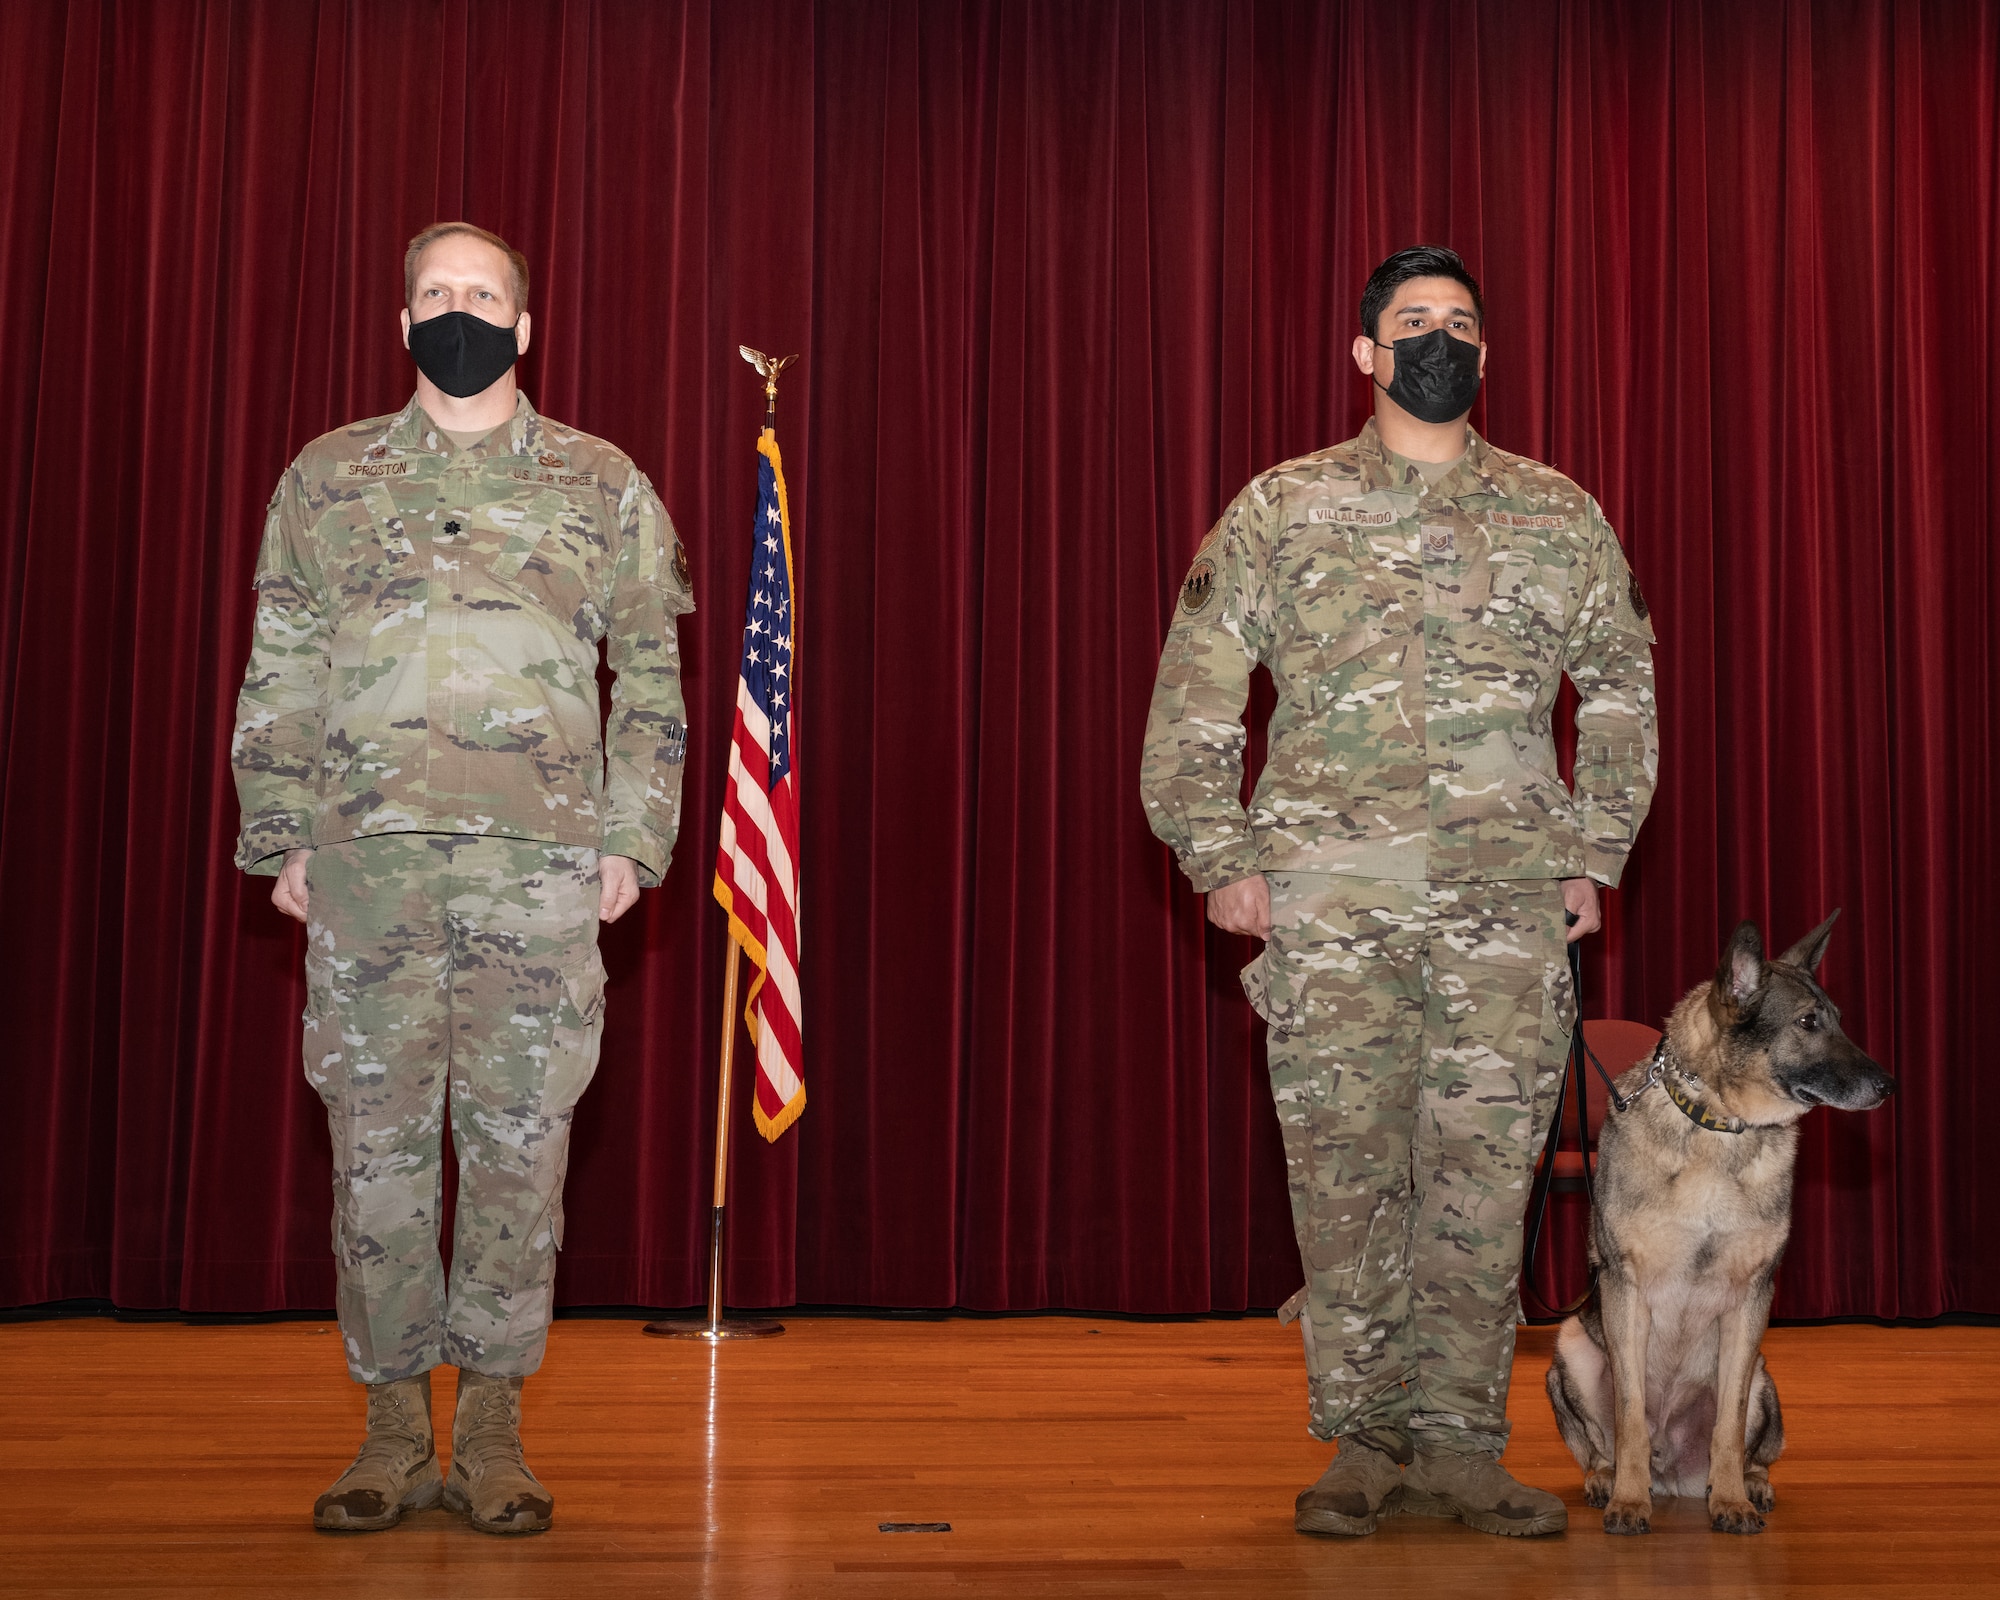 U.S. Air Force Lt. Col. Sproston, 509th Security Forces Squadron Commander and U.S. Air Force Staff Sgt. Alex Villalpando, 509th Security Forces military working dog handler, prepare to present U.S. Air Force MWD Stiffler with the Meritorious Service Medal during Stiffler's retirement ceremony at the base theater on Whiteman Air Force Base Feb. 4, 2022. Military working dogs provide a valuable force multiplier to aid in security and readiness within our units. (U.S. Air Force photo by Airman 1st Class Bryson Britt)